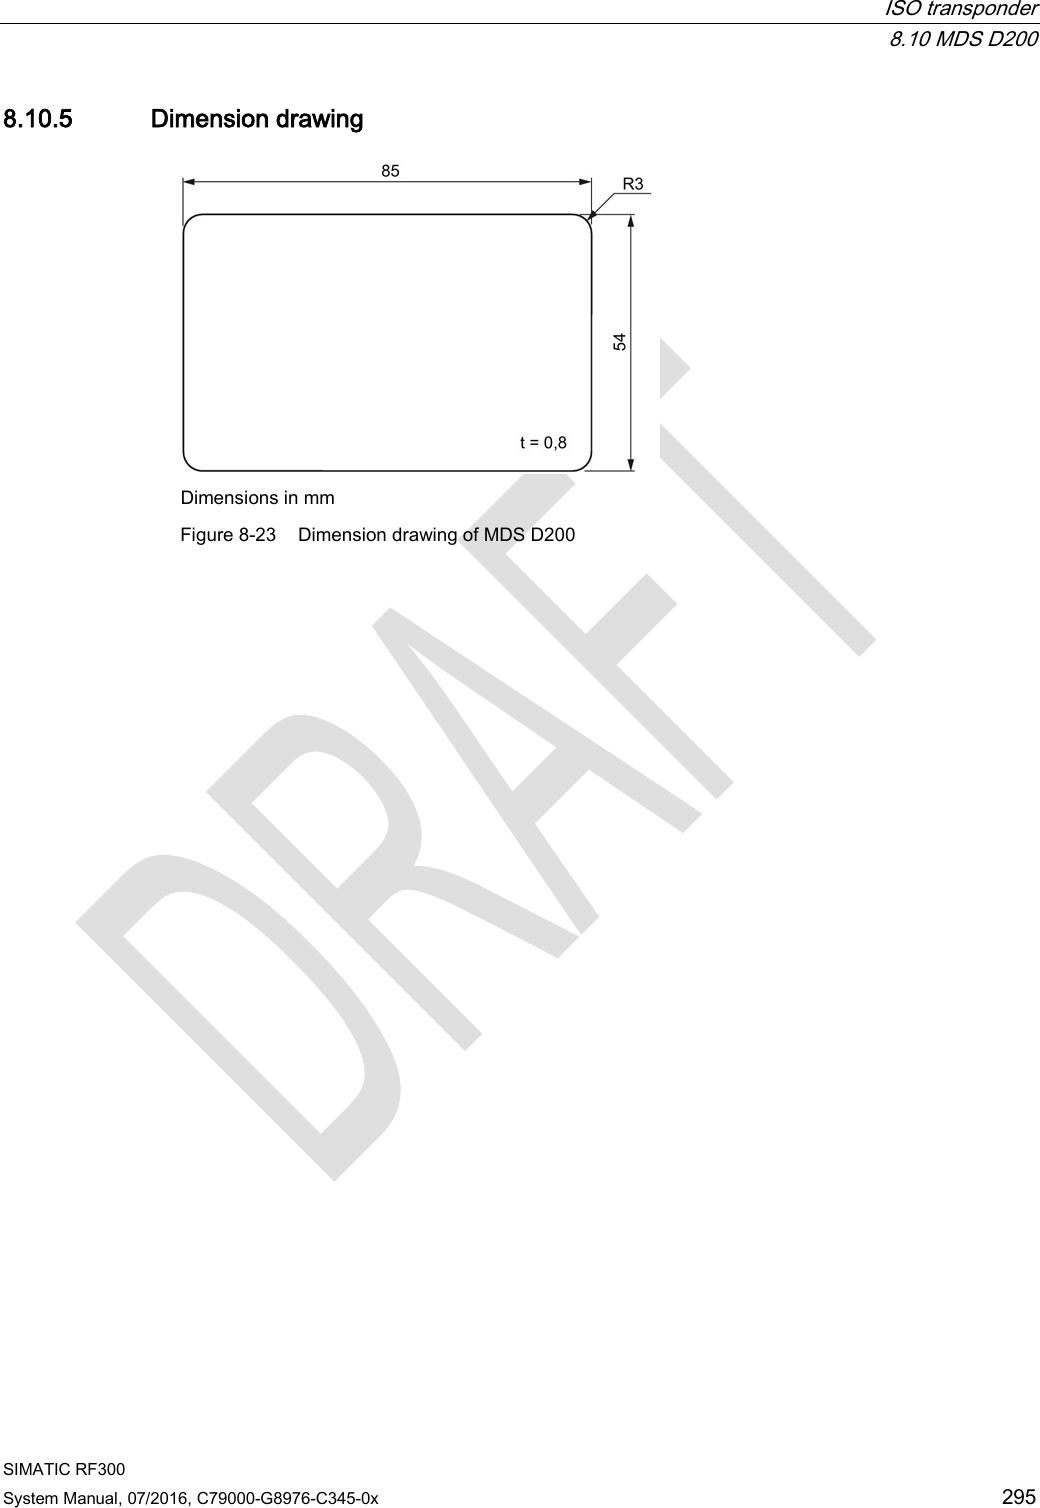  ISO transponder  8.10 MDS D200 SIMATIC RF300 System Manual, 07/2016, C79000-G8976-C345-0x 295 8.10.5 Dimension drawing  Dimensions in mm Figure 8-23 Dimension drawing of MDS D200  